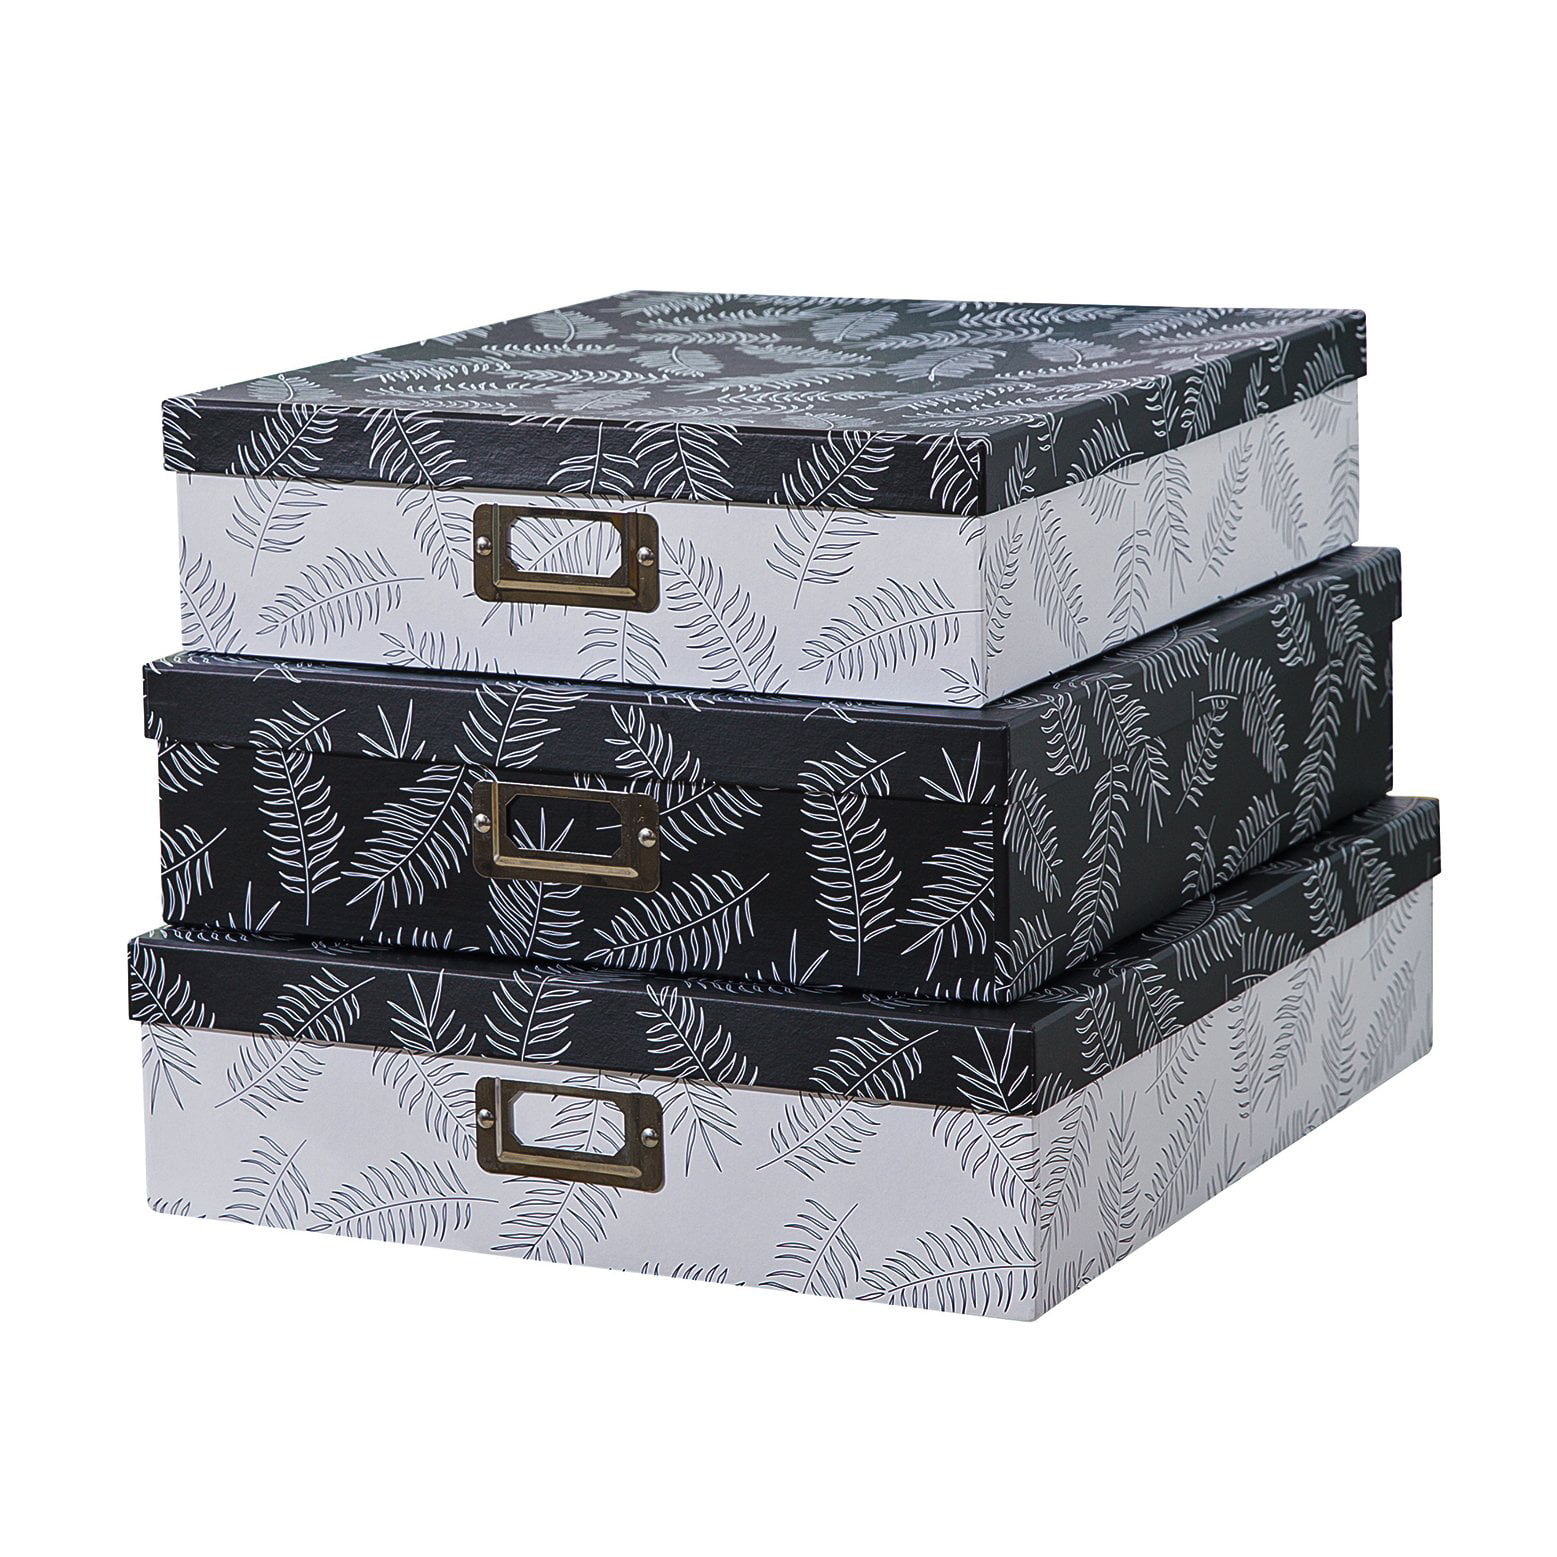 SLPR Decorative Storage Cardboard Boxes with Lids (Set of 3, Feathers ...